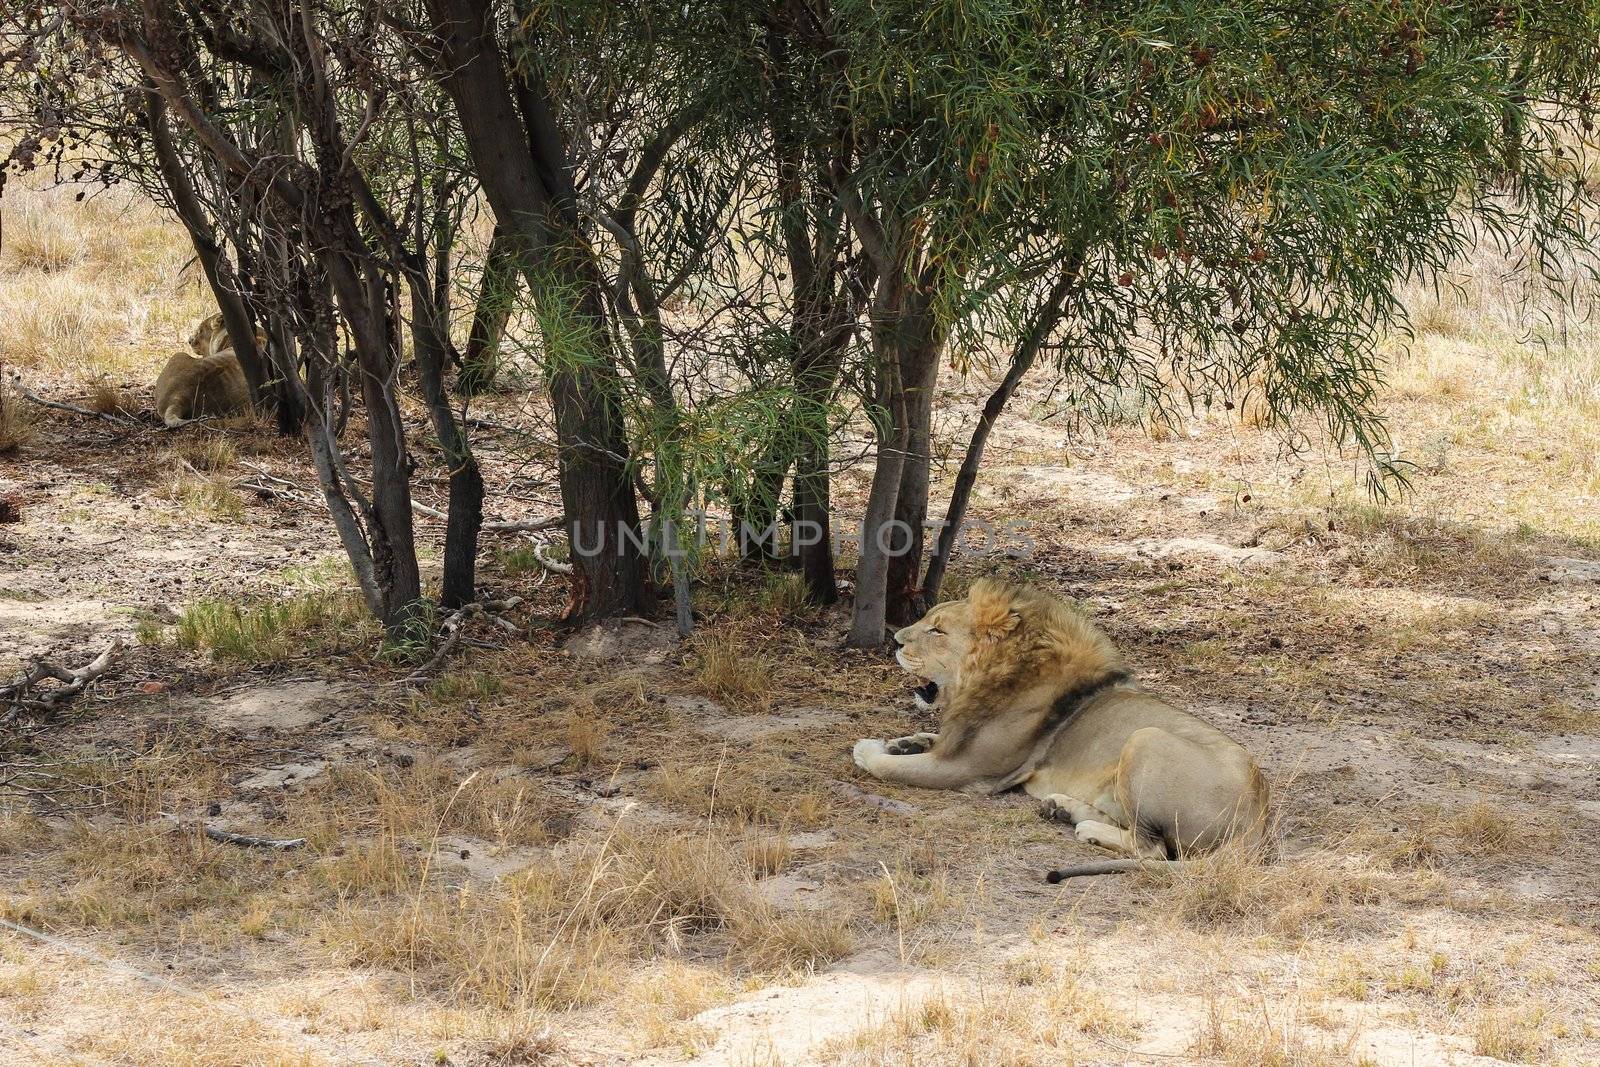 Lion lying under a tree at the cape town lion park in south africa